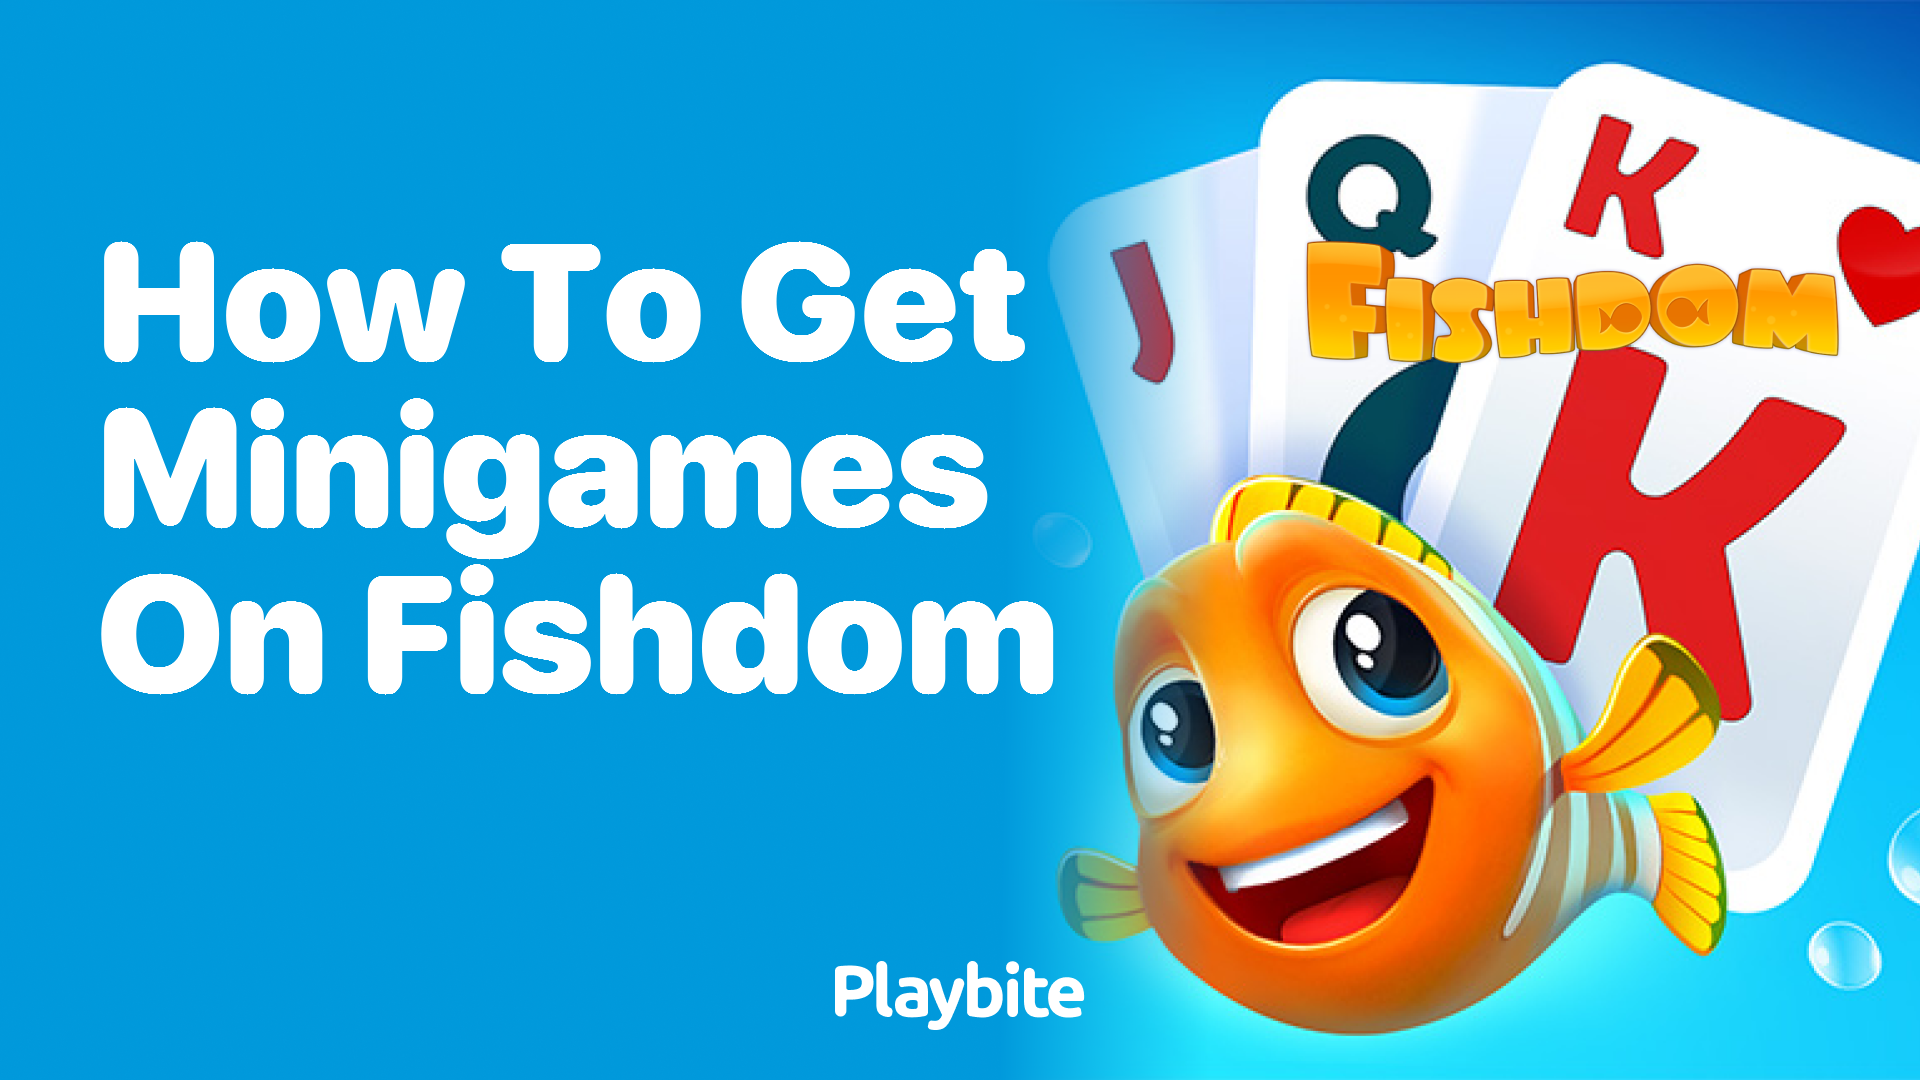 How to Get Minigames on Fishdom: A Simple Guide